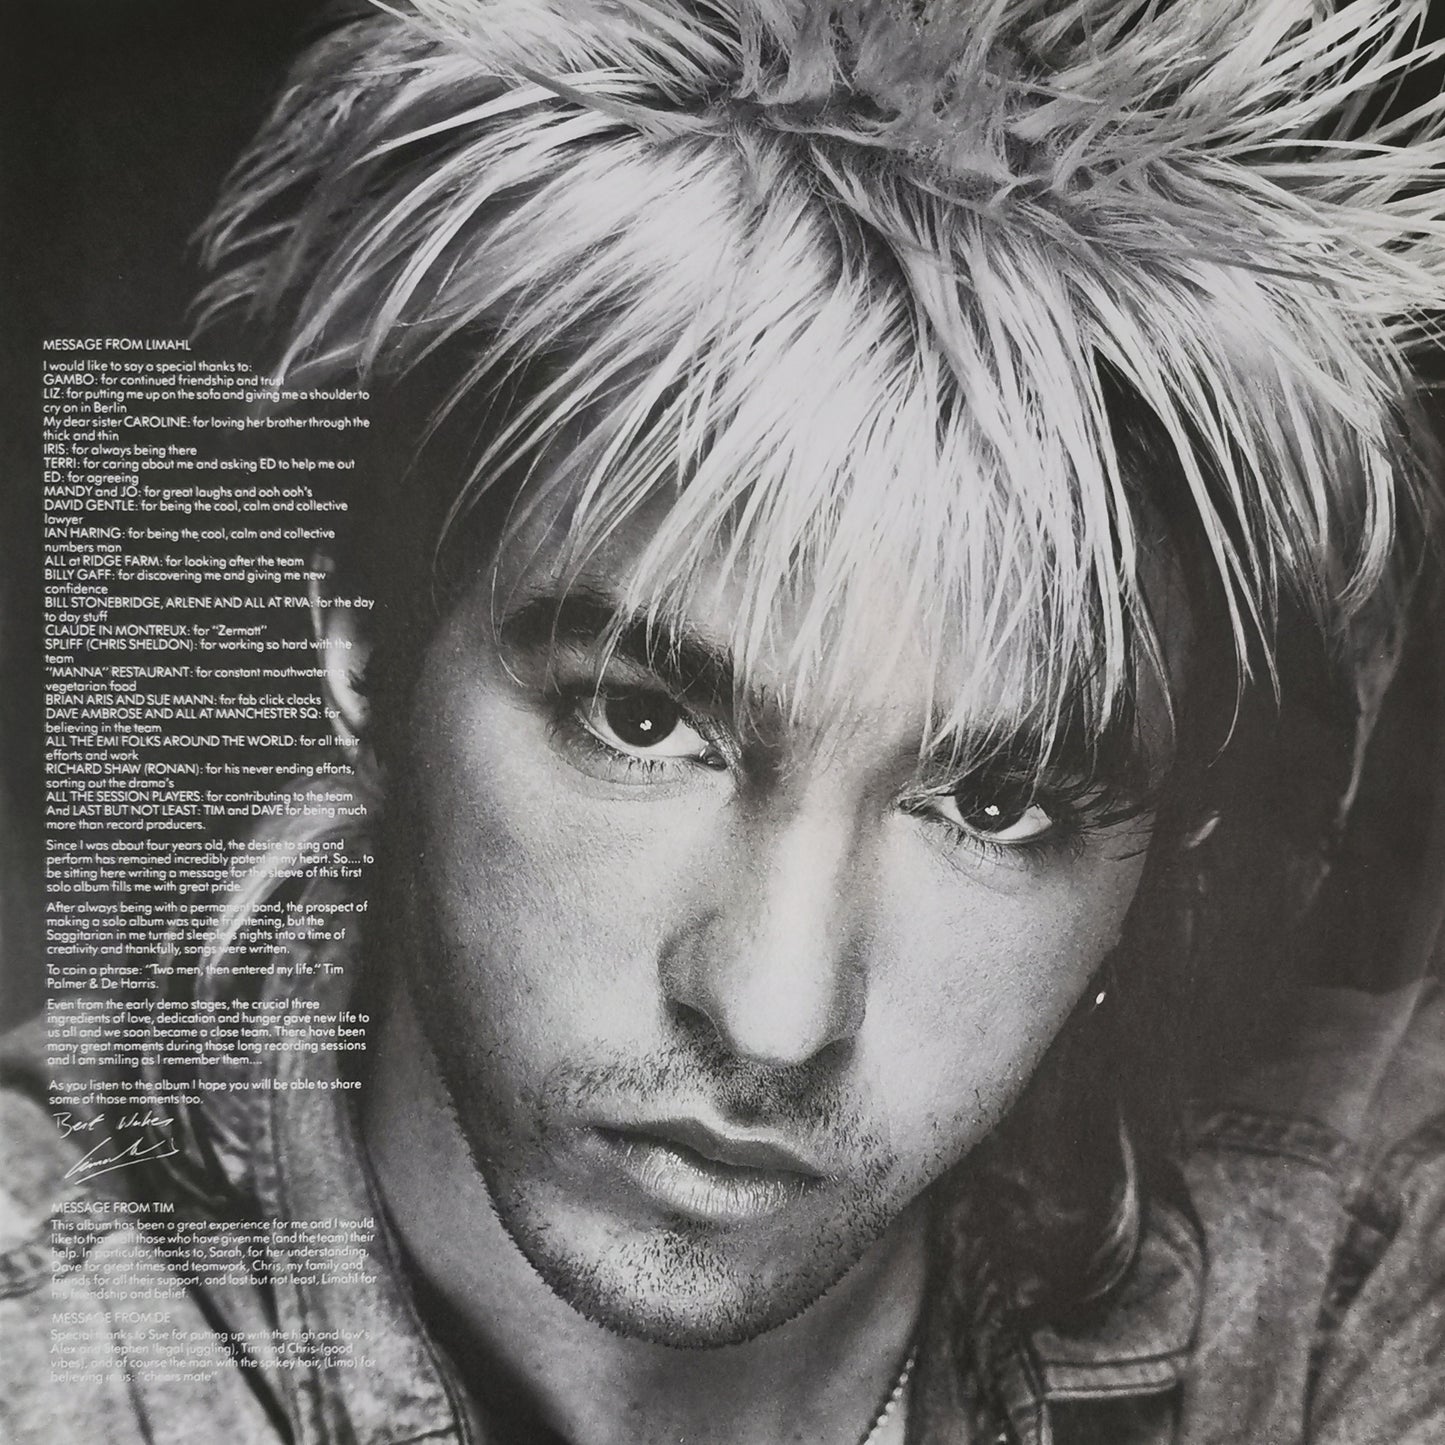 LIMAHL - Don't Suppose